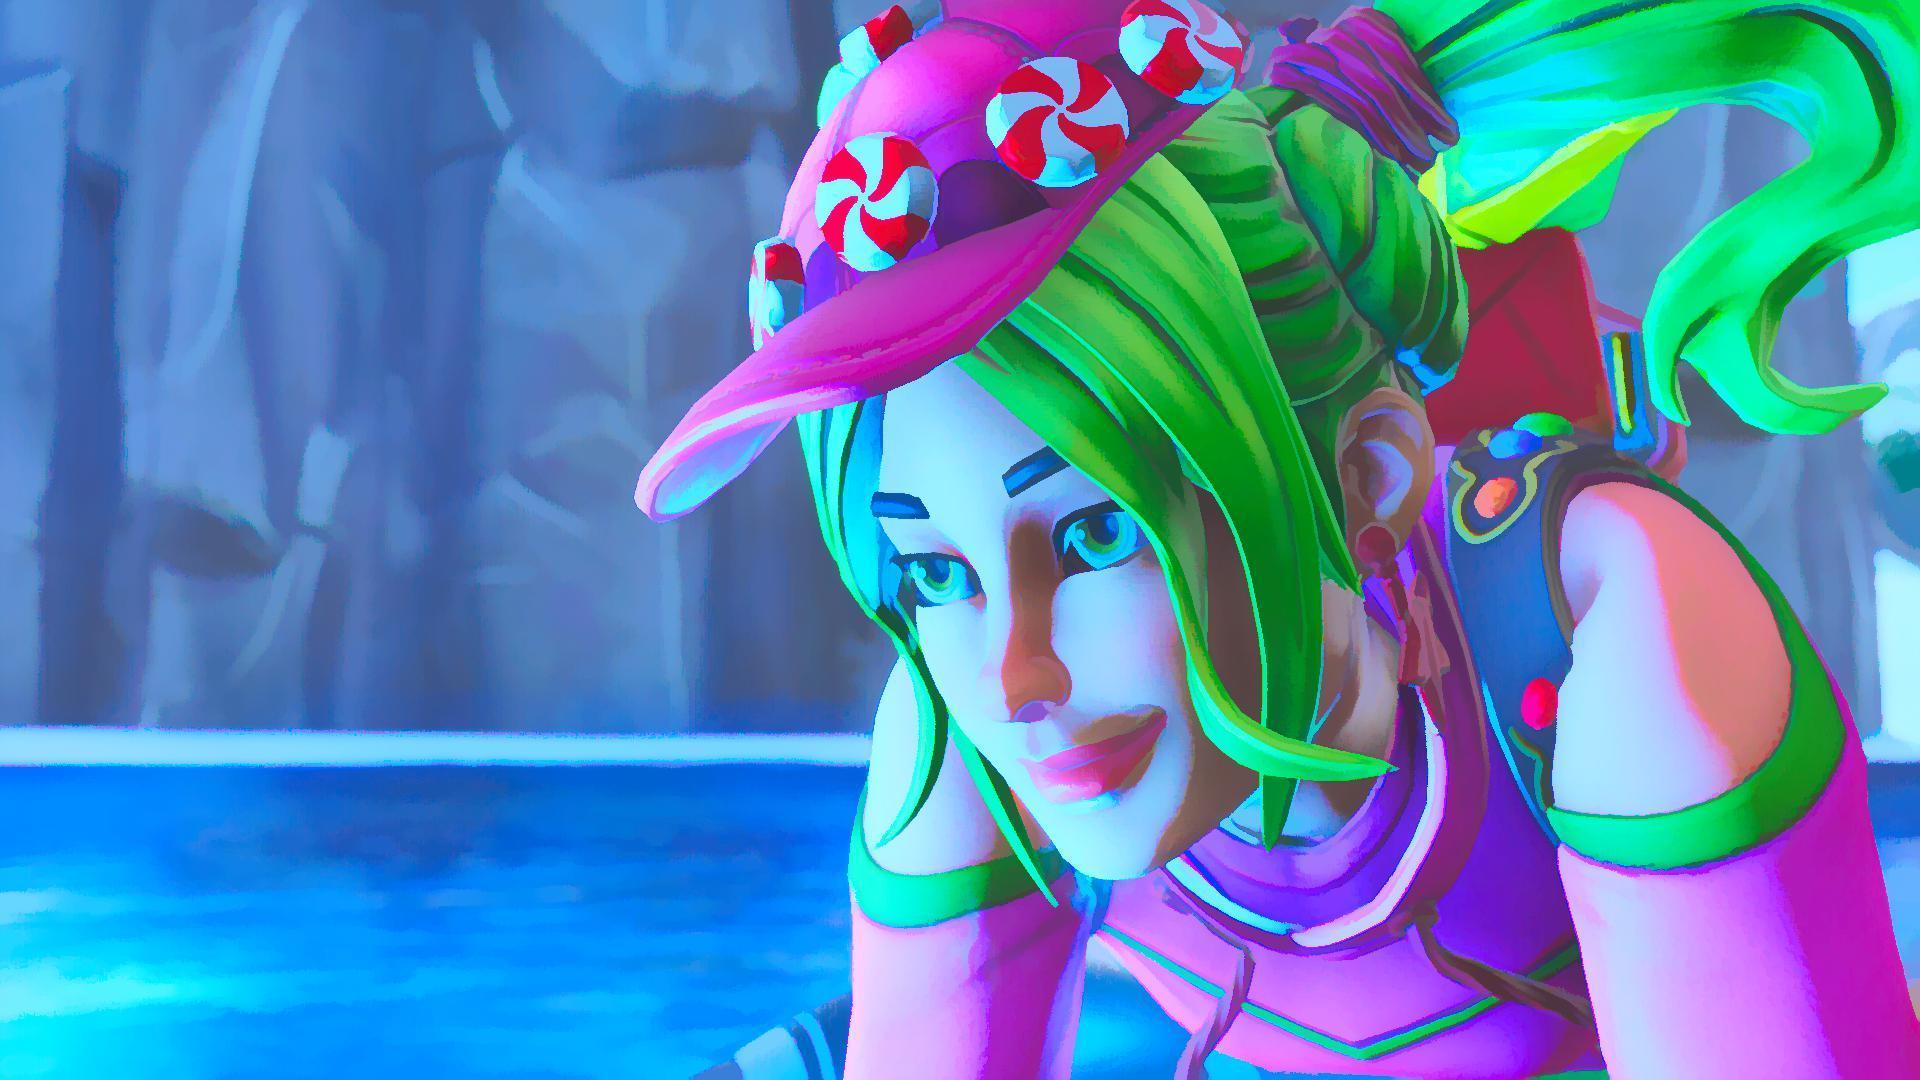 Zoey Fortnite Wallpapers Wallpaper Cave 